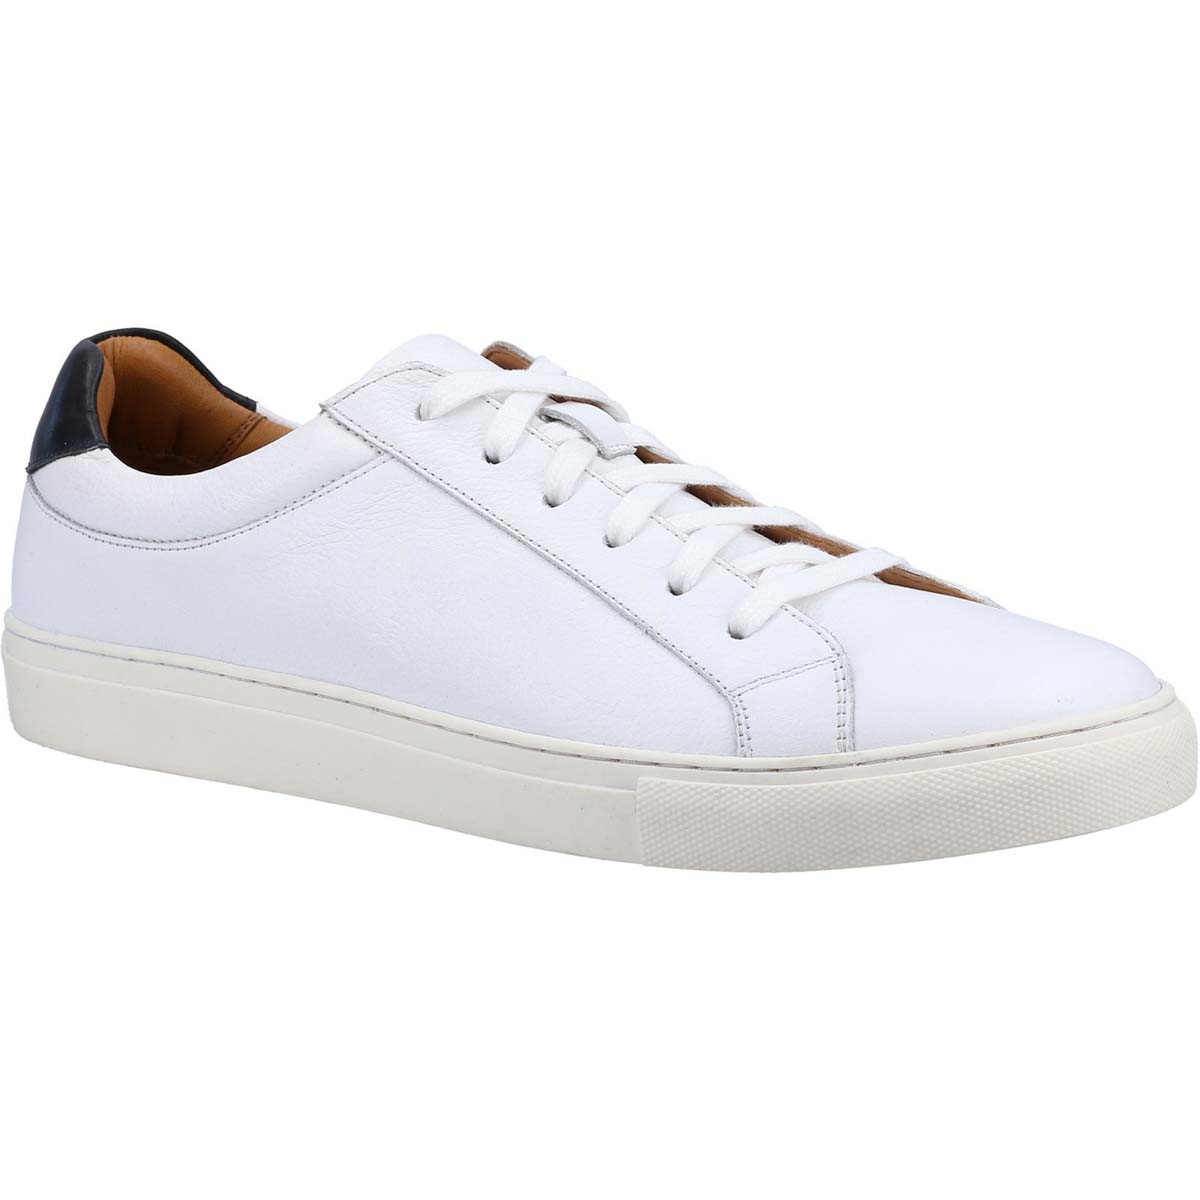 Hush Puppies Colton White Mens trainers 36670-68485 in a Plain Leather in Size 12